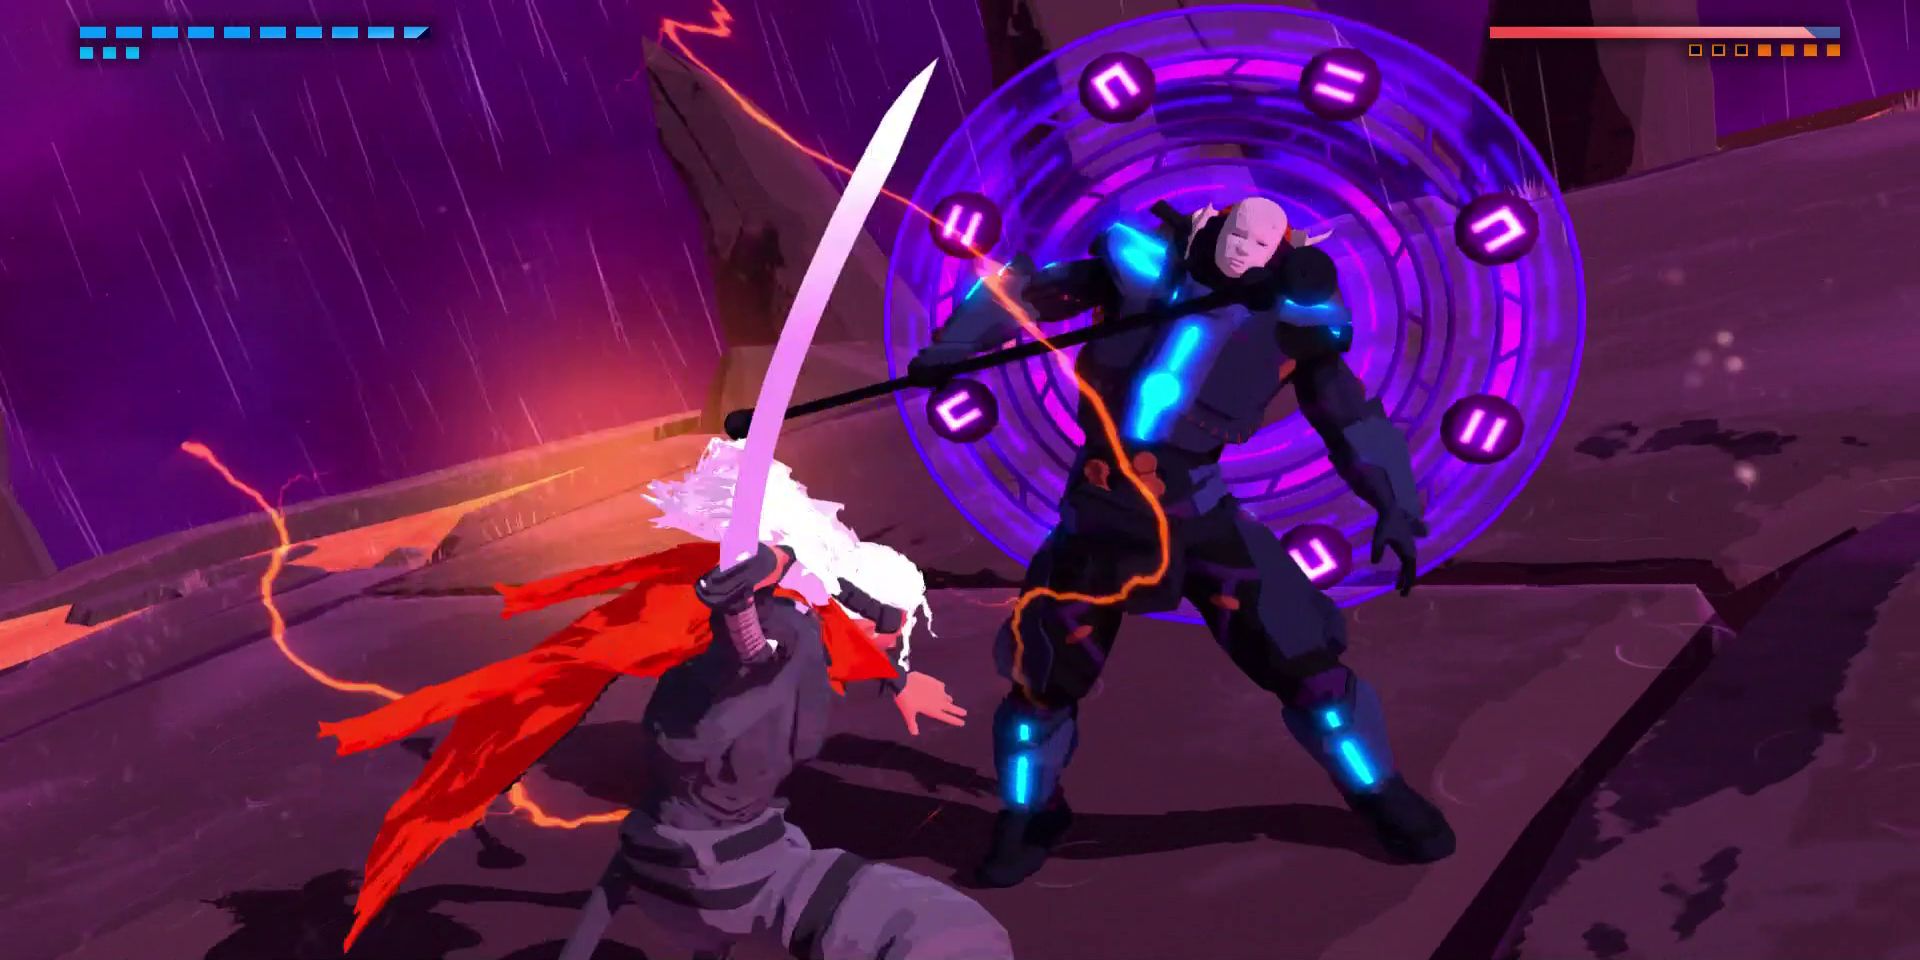 Gameplay from the 2016 video game Furi.